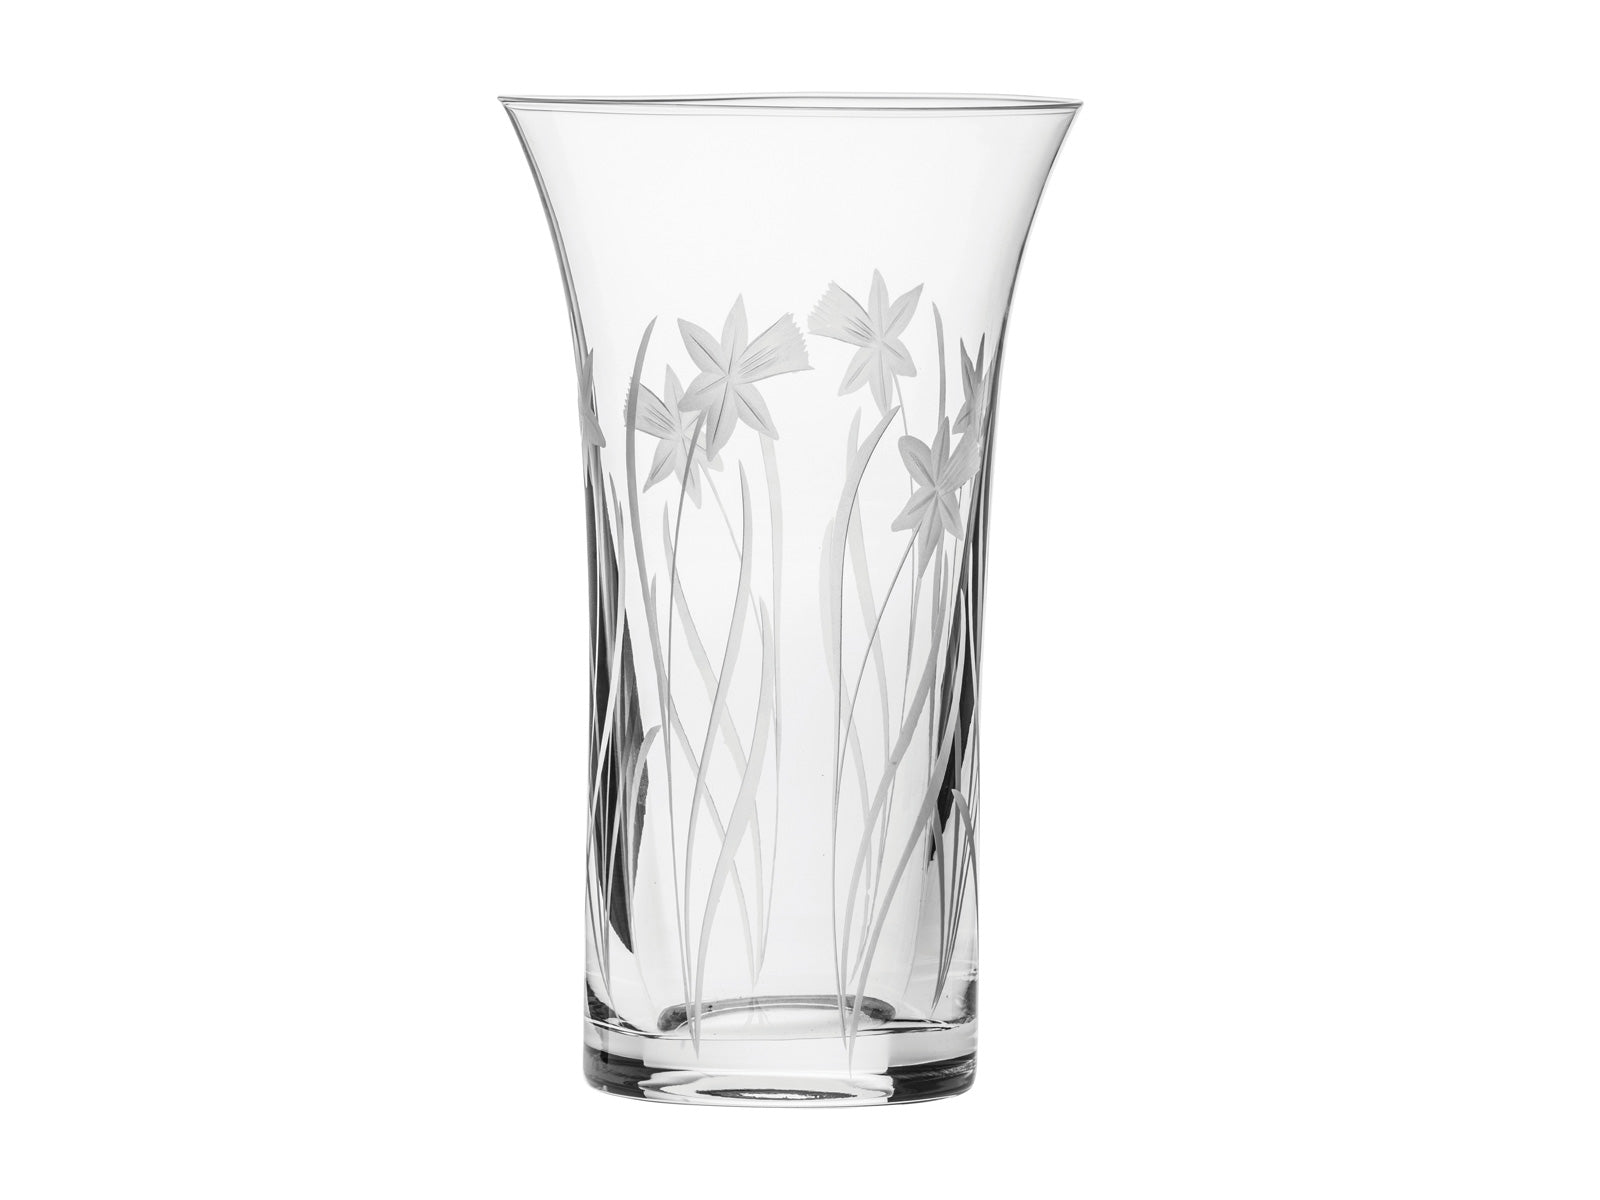 A crystal vase that flares out gently at the top, featuring a hand-cut daffodil motif across the sides